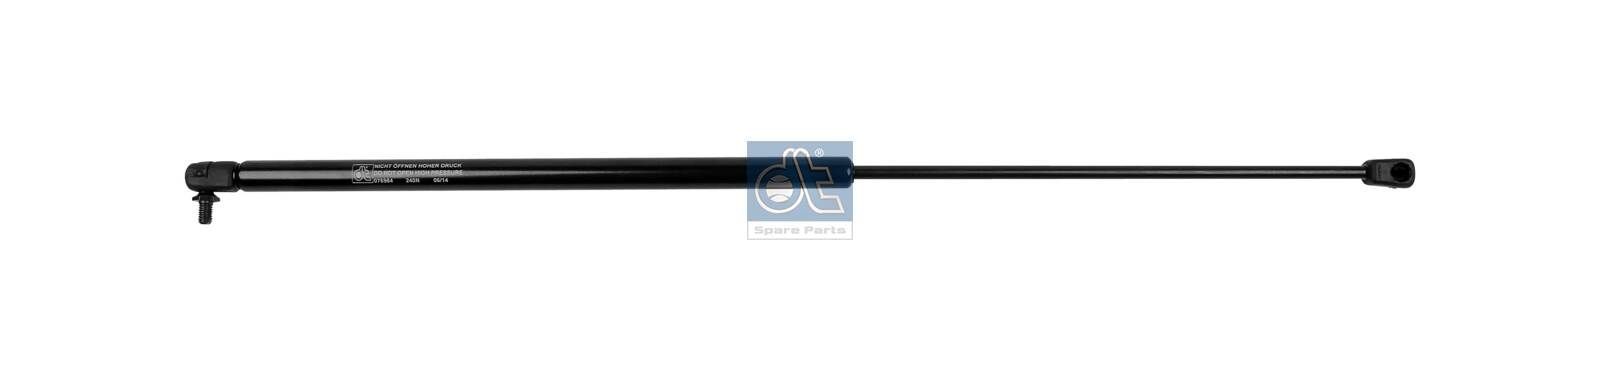 DT Spare Parts 5.64127 Gas Spring 240N, 671 mm